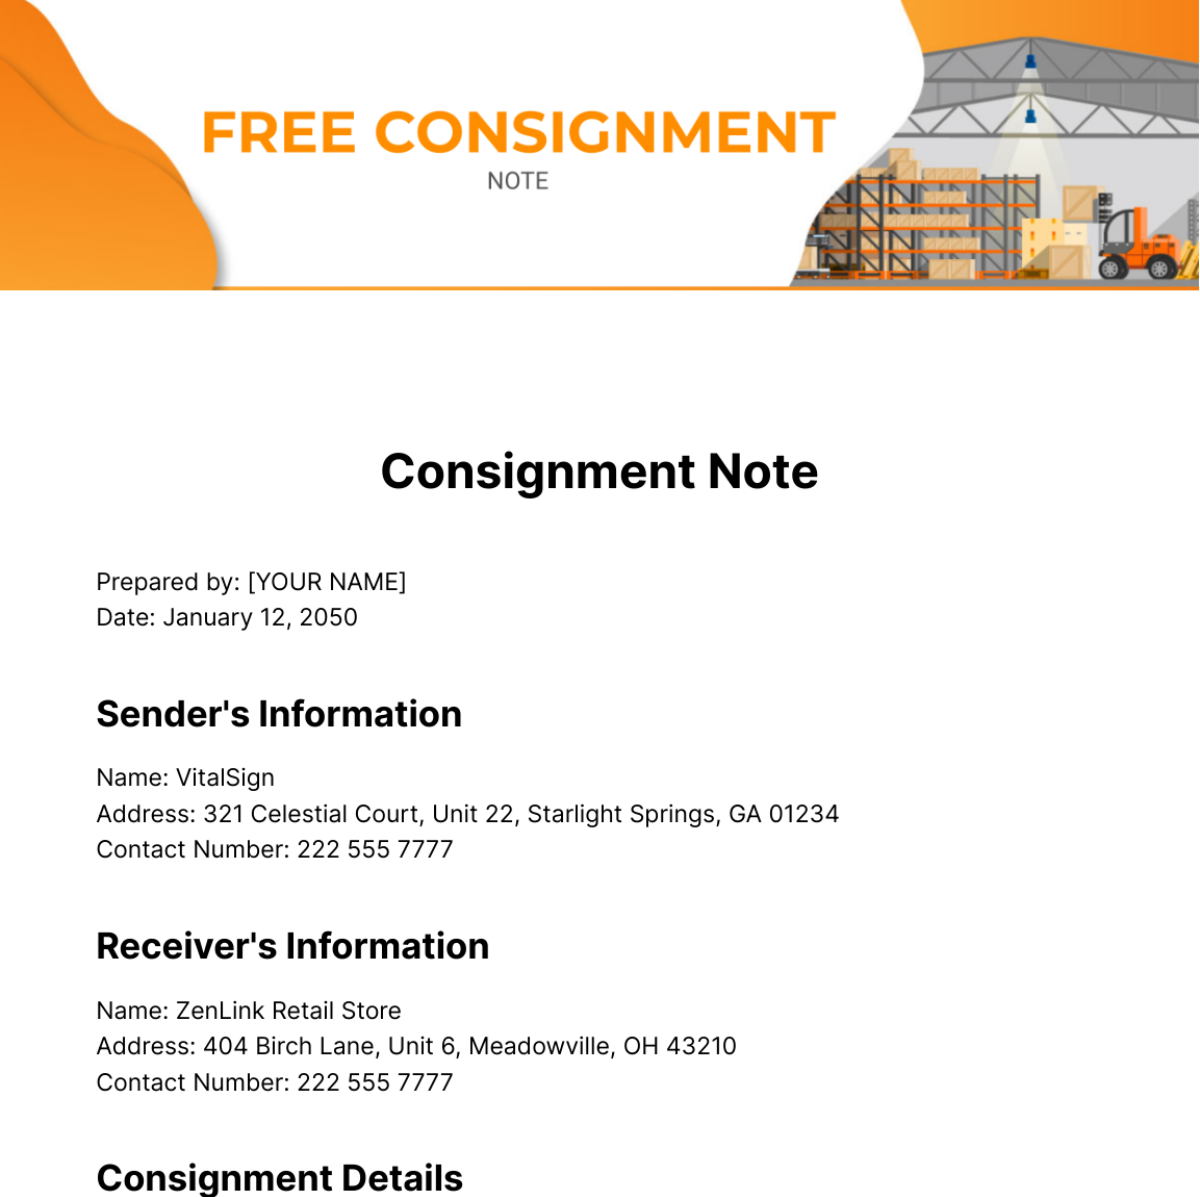 Free Consignment Note Template